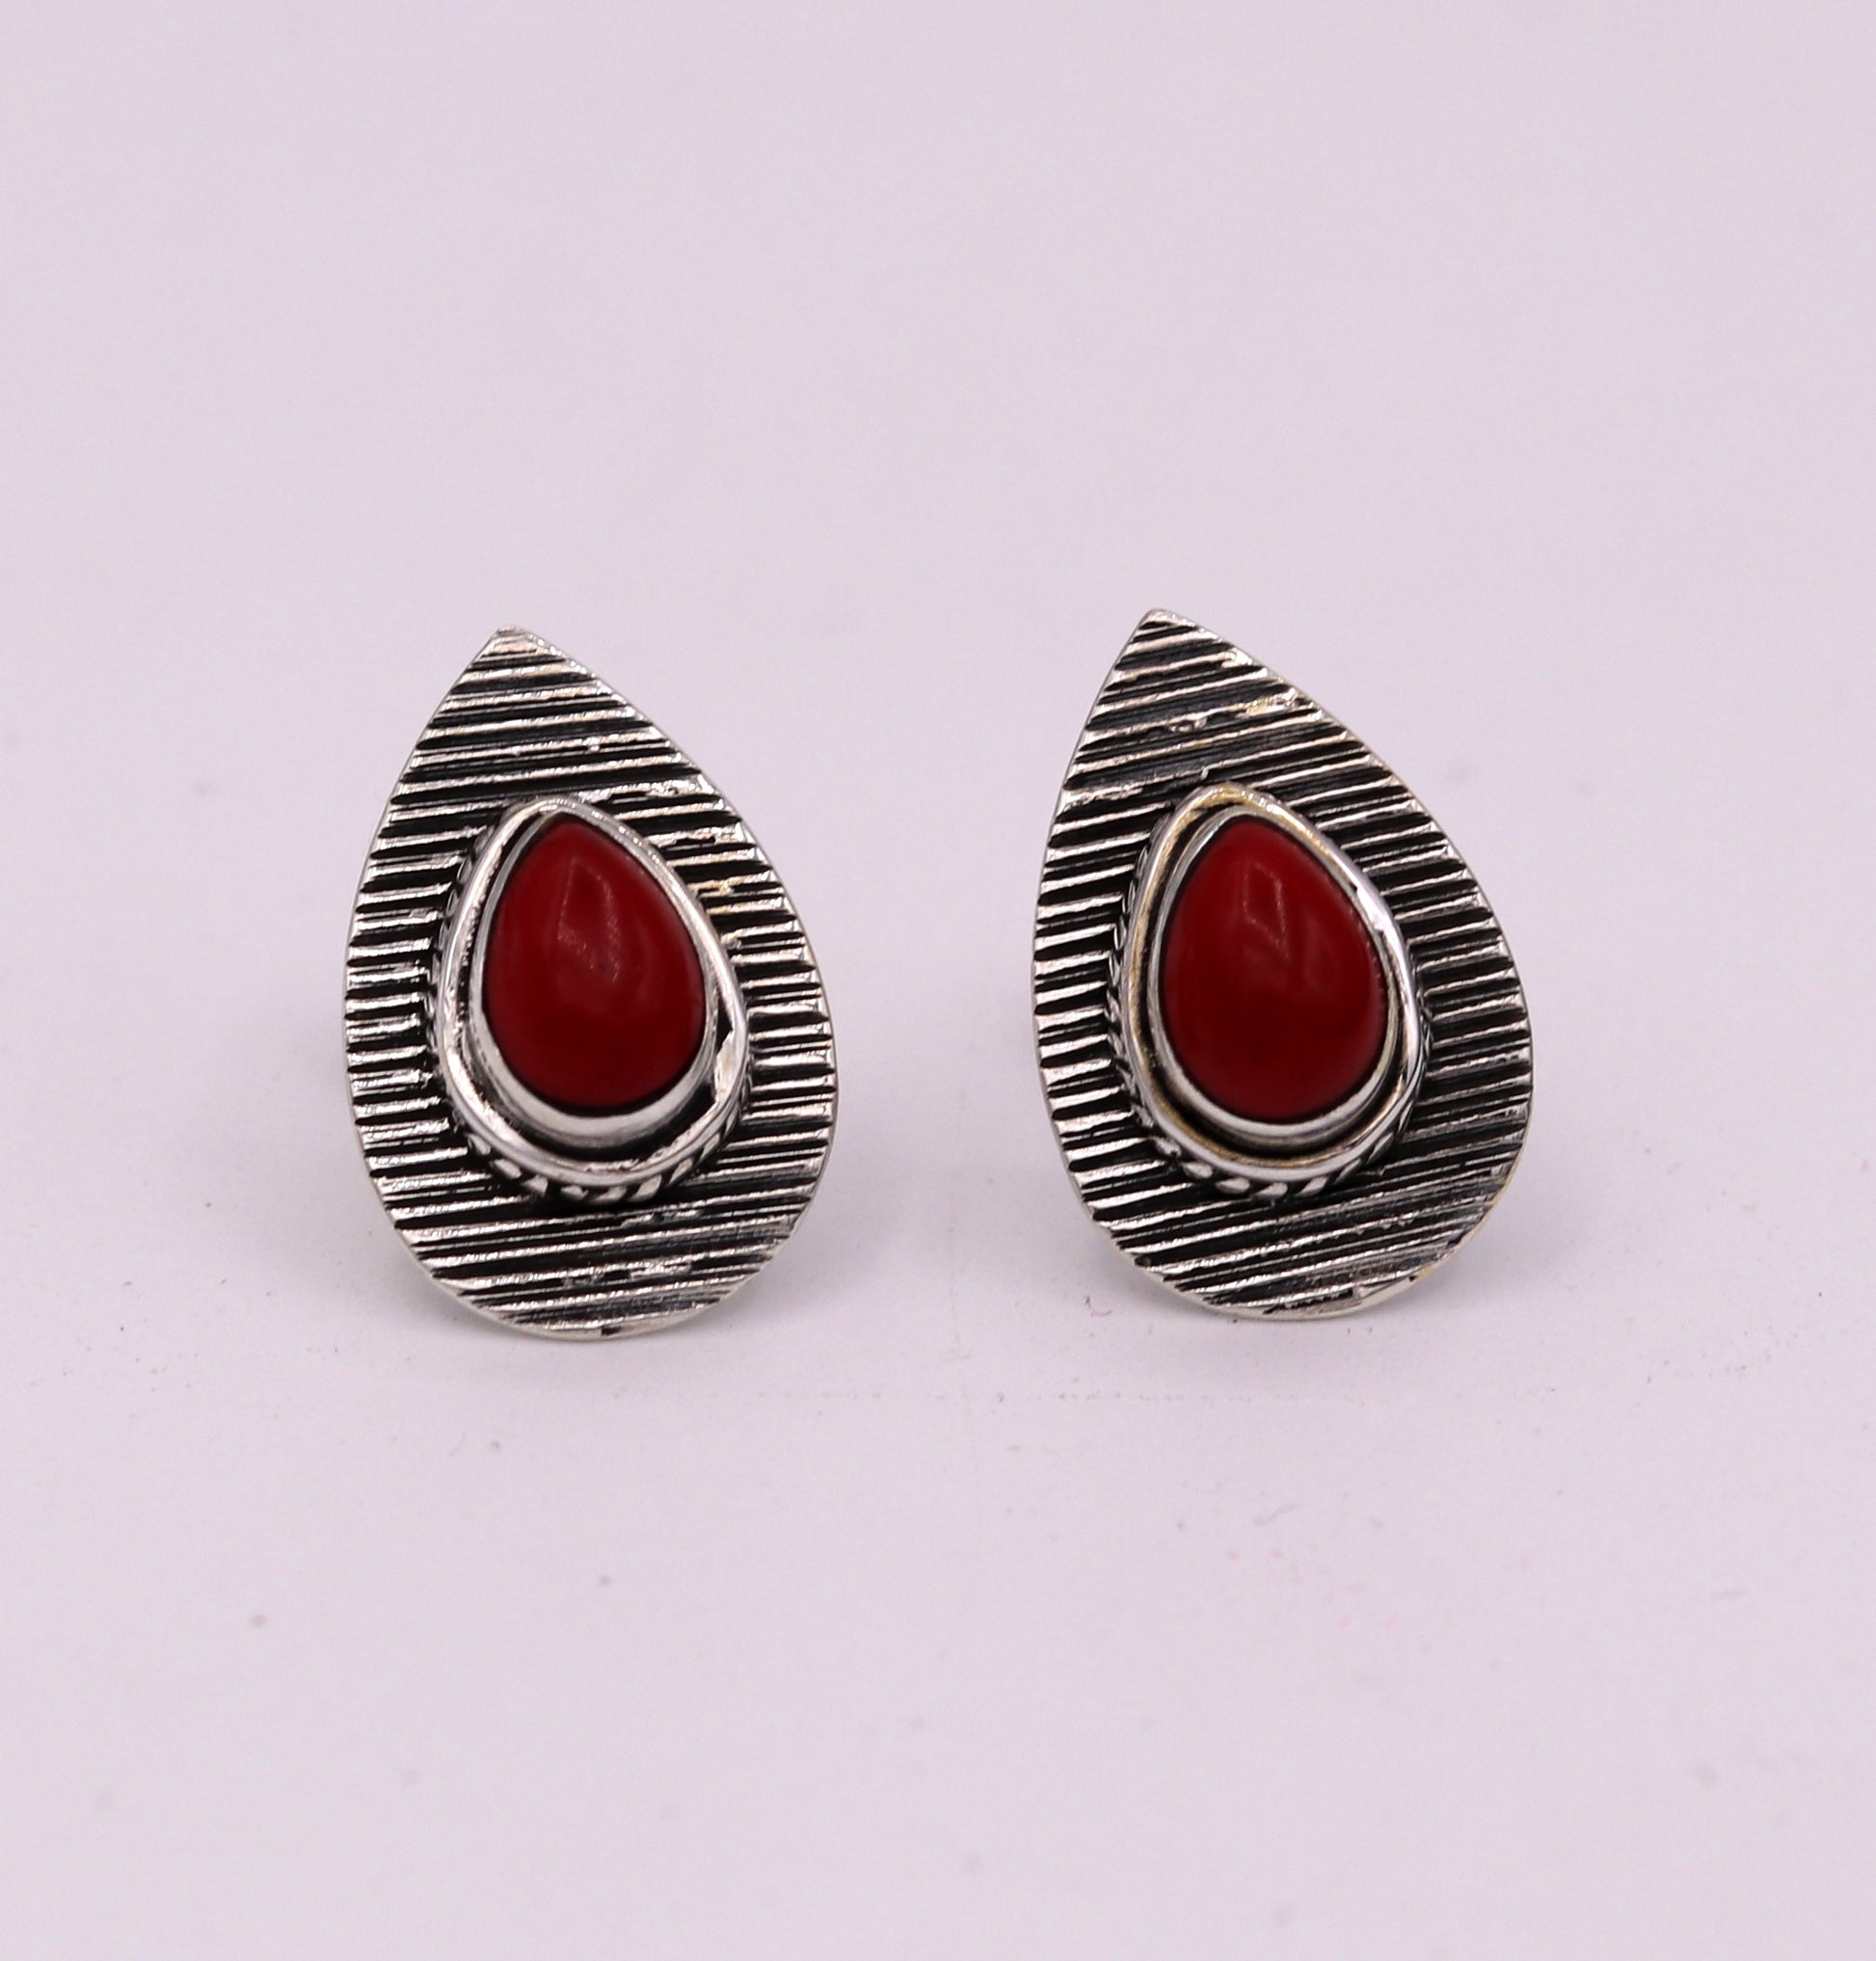 SAPPHIRE RED COLOR STONE HANDMADE 925 STERLING SILVER STUD VINTAGE EARRINGS s238 - TRIBAL ORNAMENTS